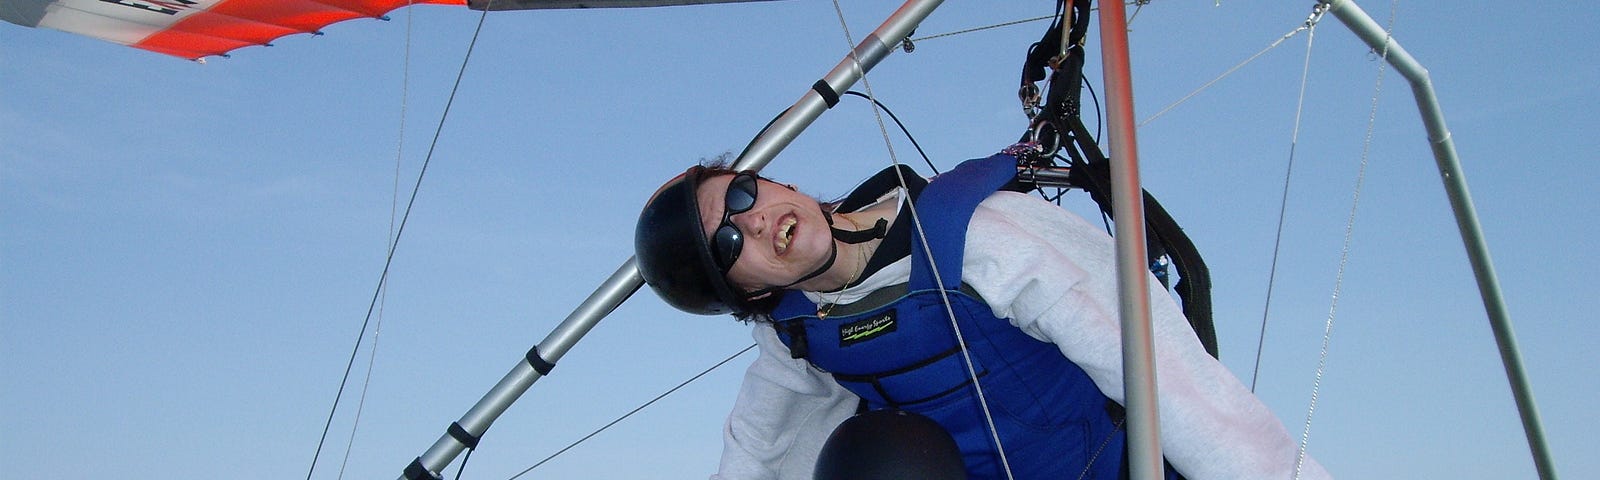 I dressed in a blue vest, and black goggles, suspended from a hang glider and above the instructor in midair.